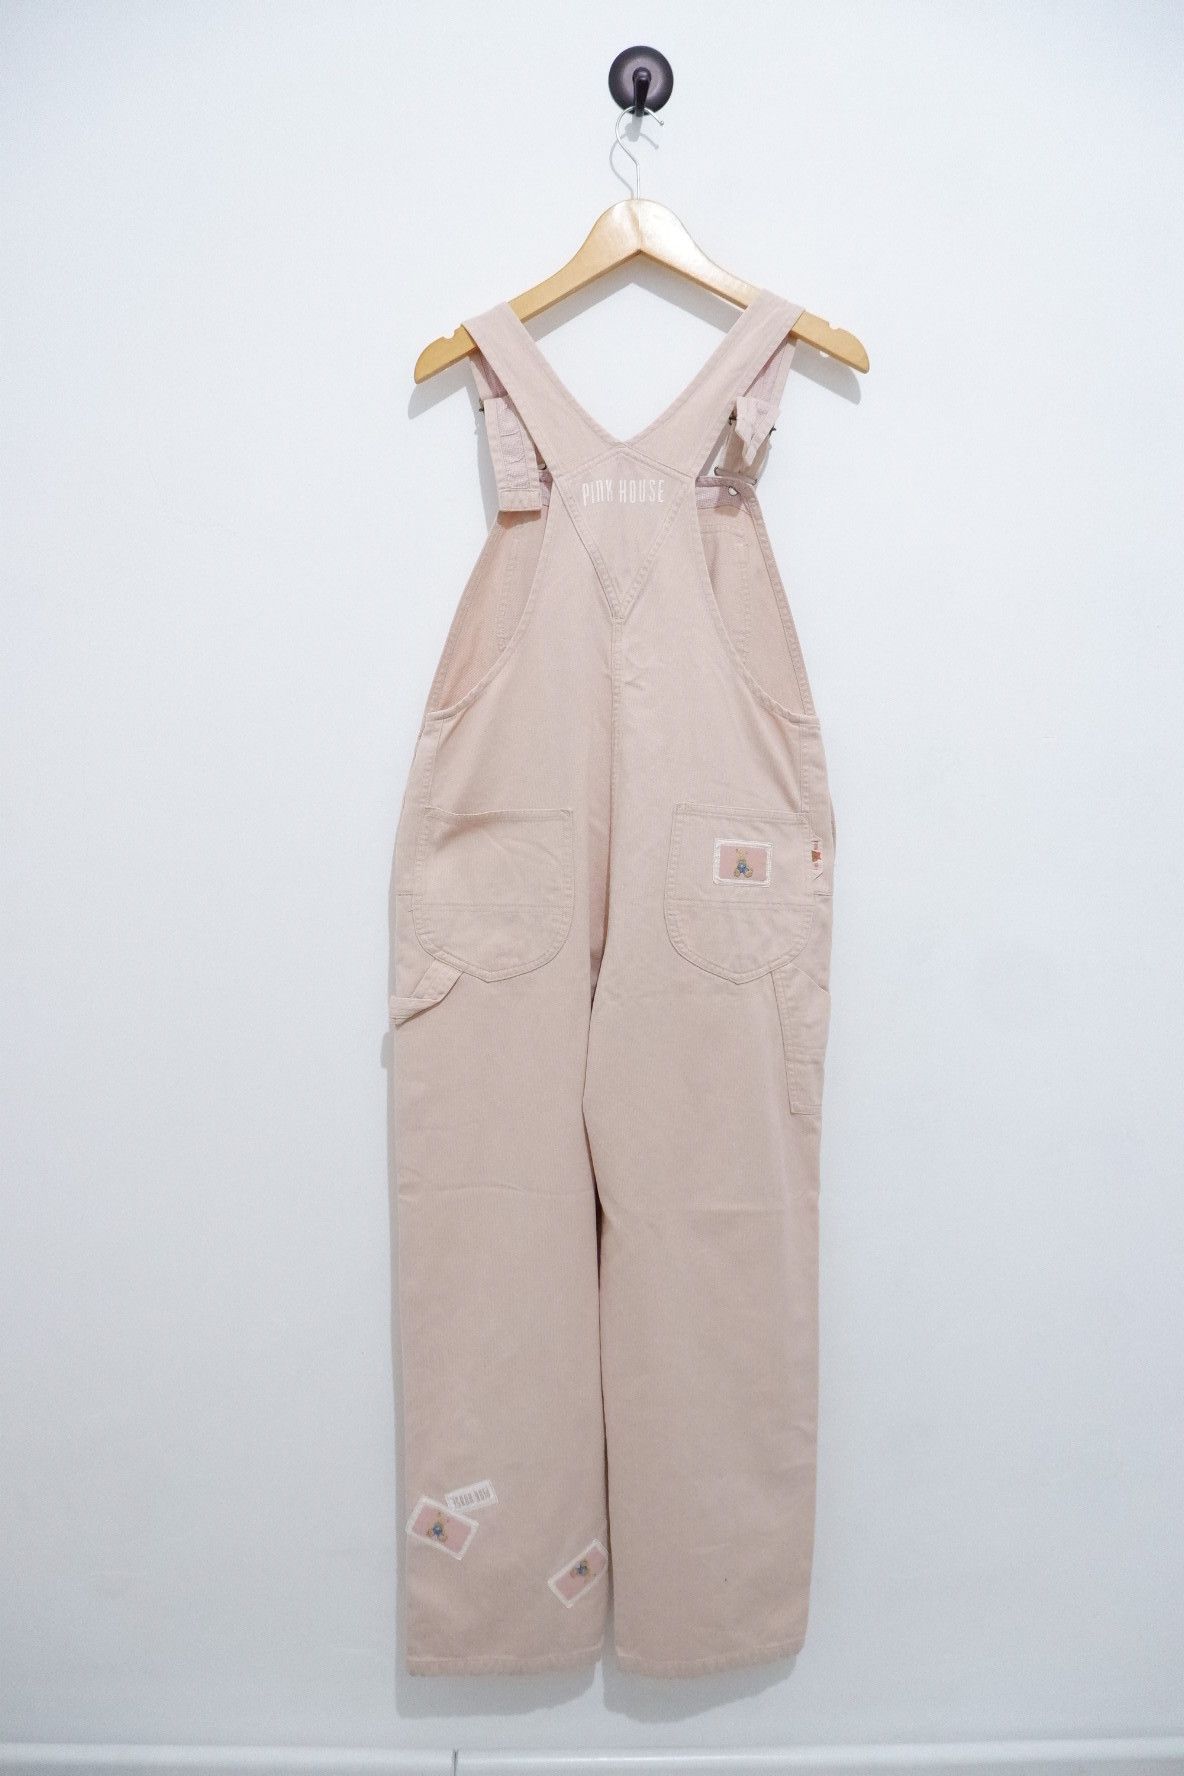 Japanese Brand Vintage Pink House Carpenter Overalls Size US 32 / EU 48 - 2 Preview